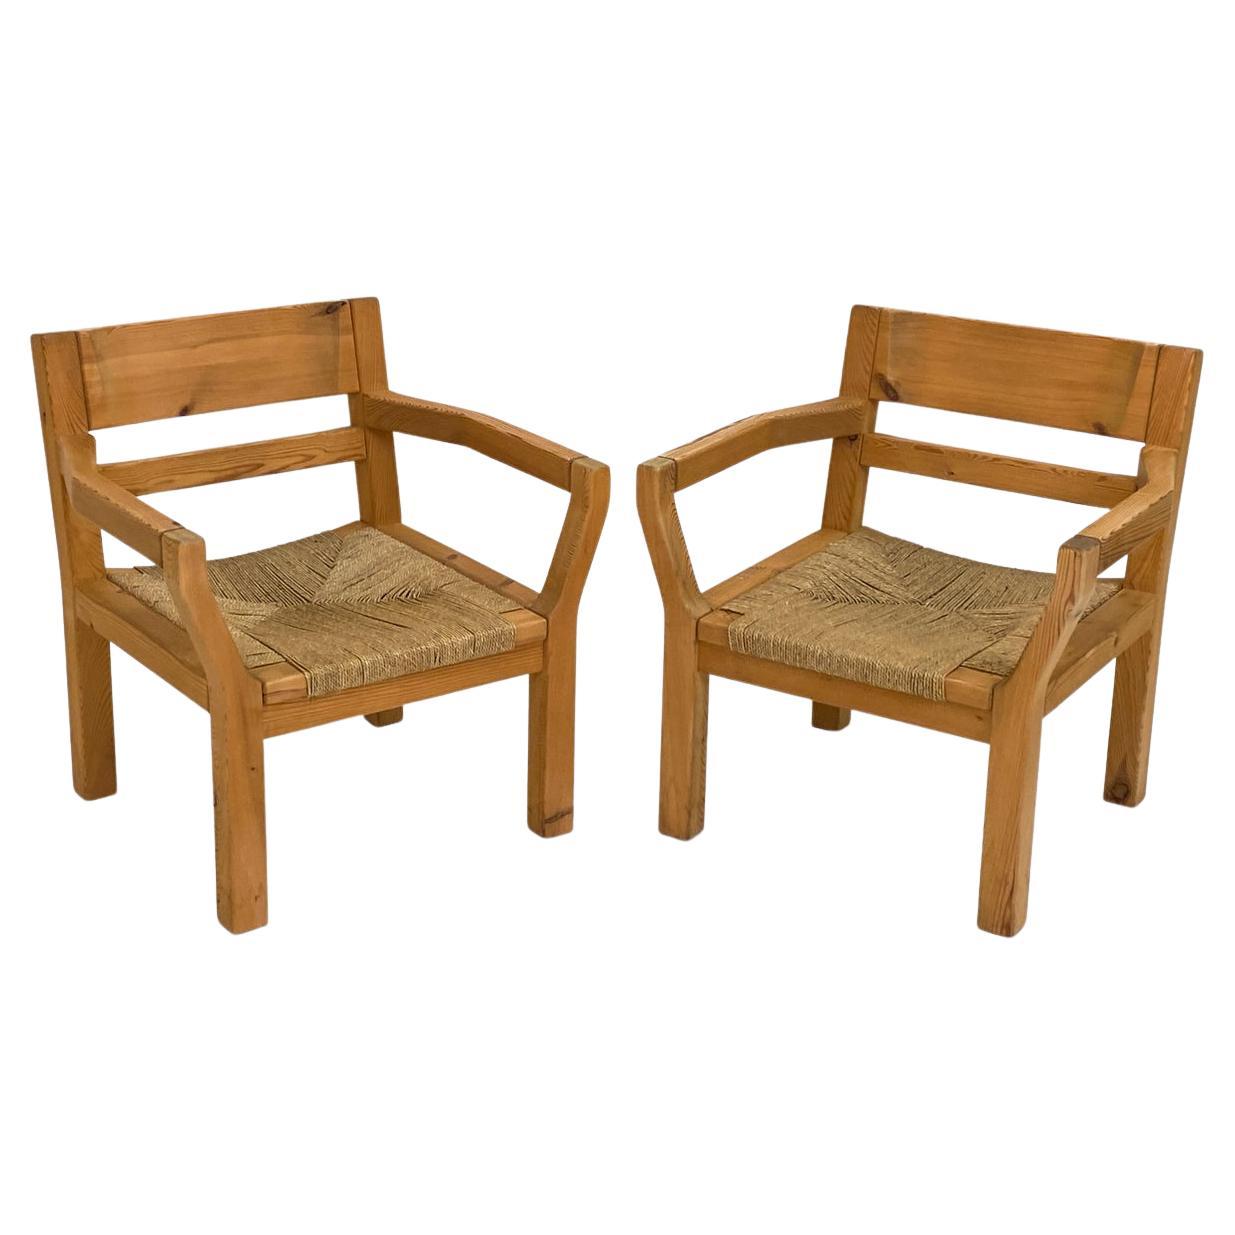 Pair of Tage Poulsen Pine & Rush Seat Lounge Chairs, c. 1970's For Sale